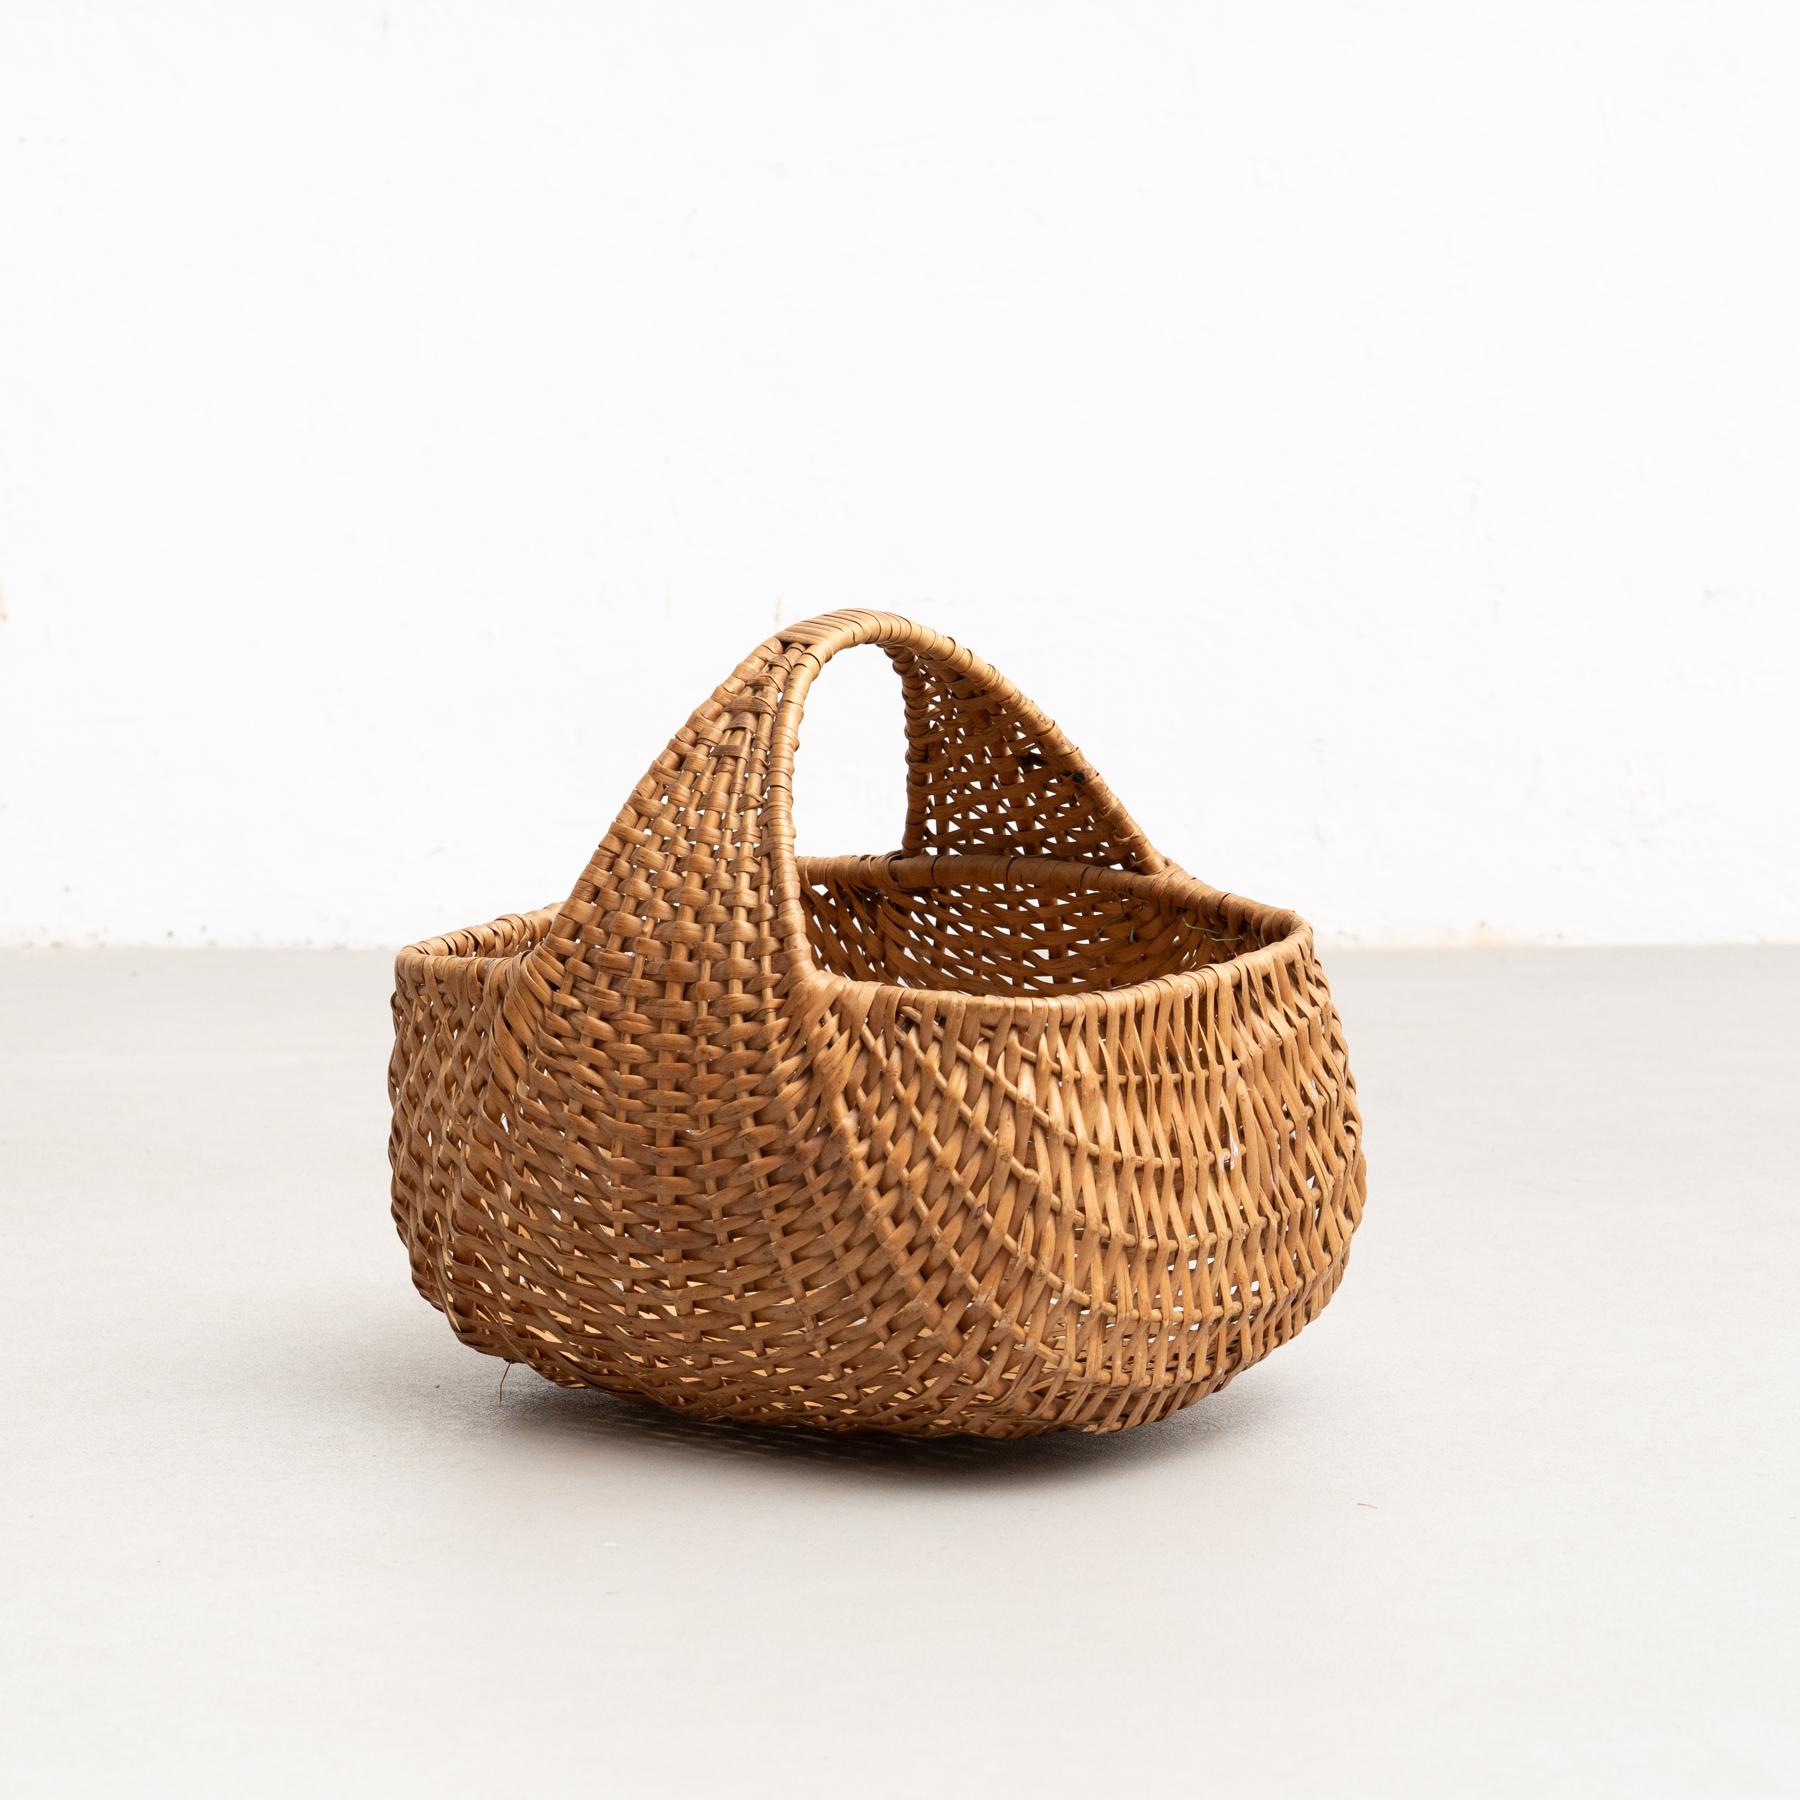 Vintage traditional woven wicker picnic basket in a classic pattern.

Made by an unknown manufacturer, in France, circa 1940

Materials:
Wicker.

In original condition, with minor wear consistent of age and use, preserving a beautiful patina.